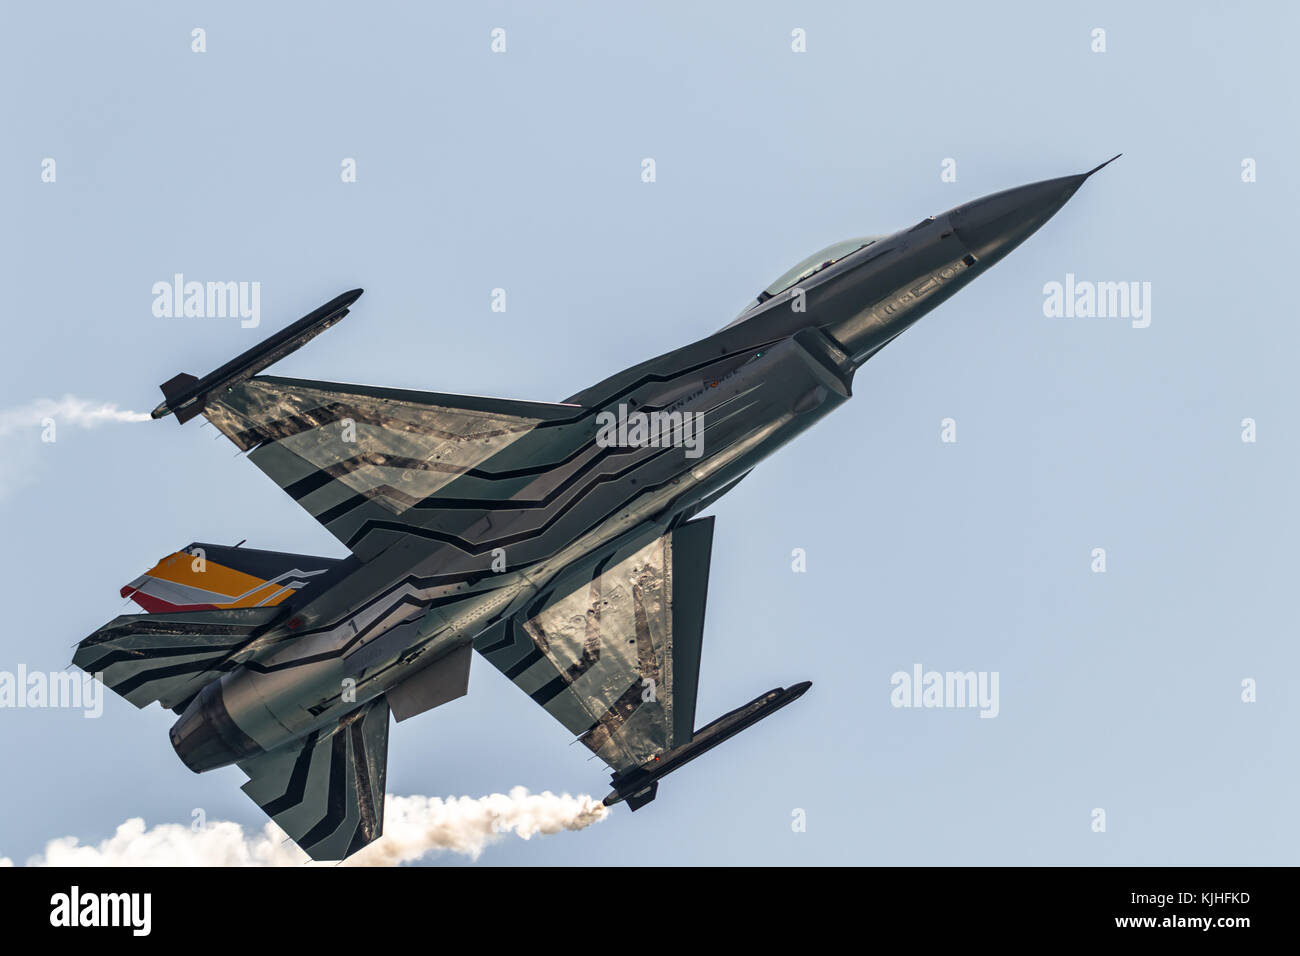 TORRE DEL MAR, MALAGA, SPAIN-JUL 30: Aircraft F-16 Belgian solo display taking part in a exhibition on the 2nd airshow of Torre del Mar on July 30, 20 Stock Photo